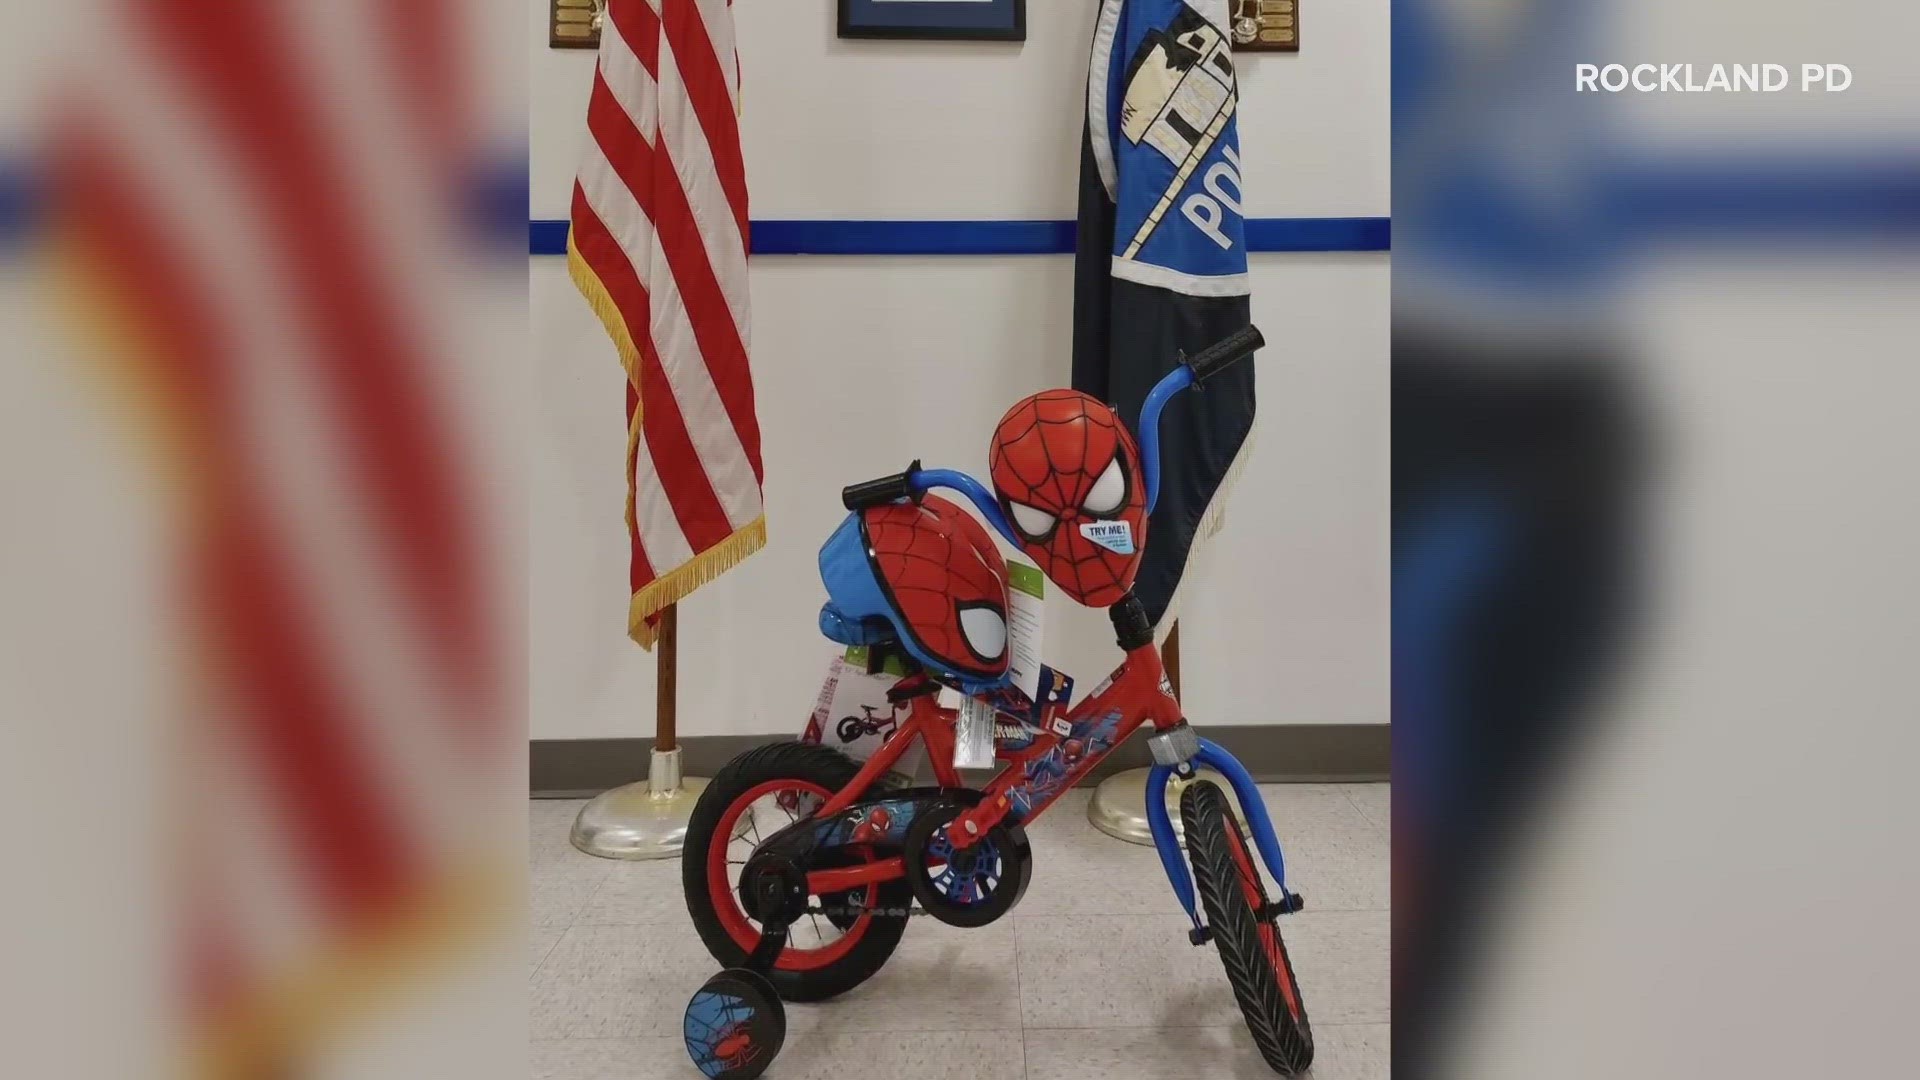 A woman who wants to stay anonymous visited the Rockland Police Department to donate a new Spiderman bike to a boy who had his stolen.